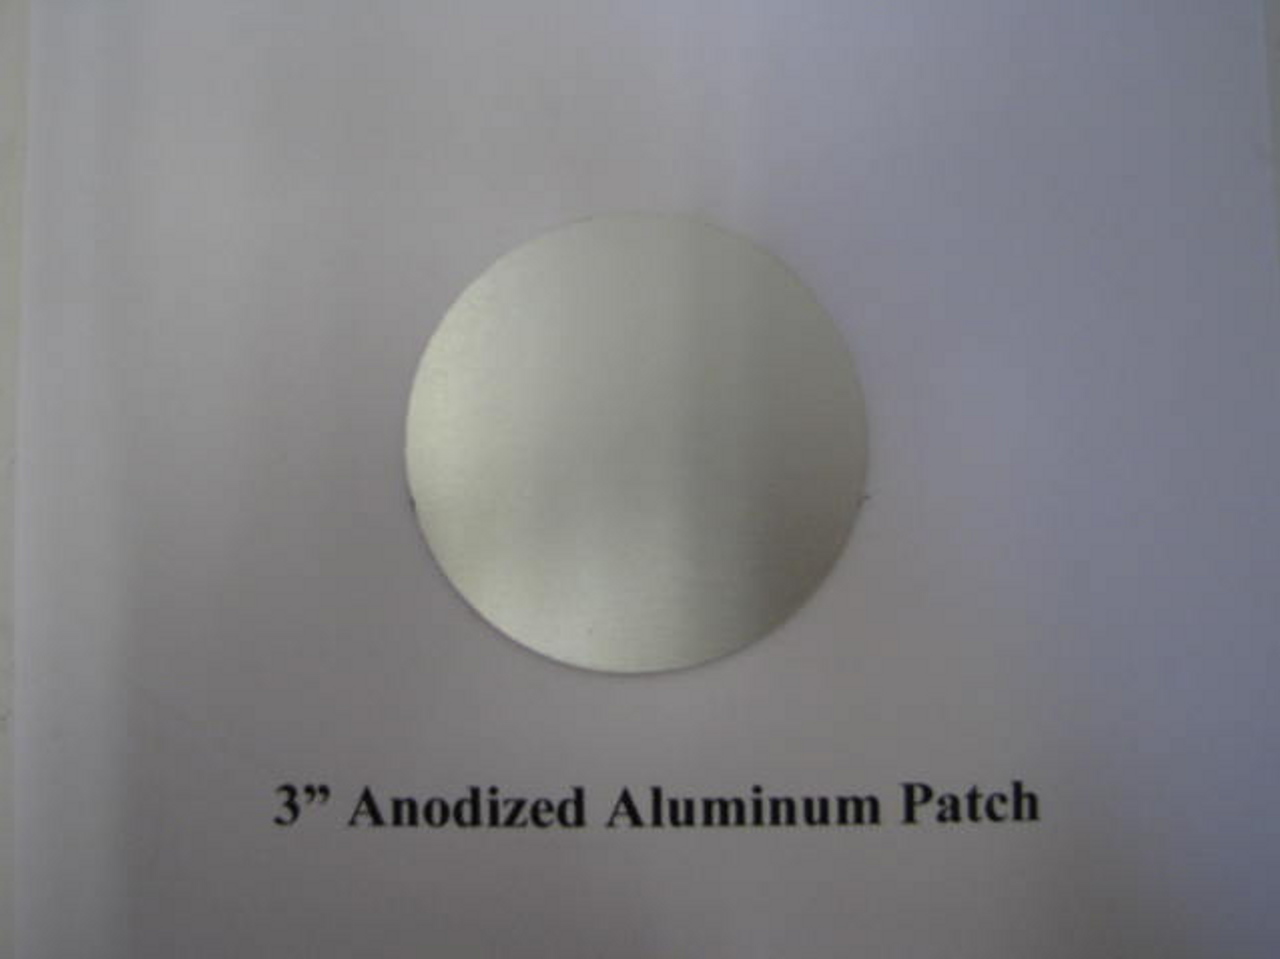 Aluminum Round Patch 3" - Anodized -(CBP021) FRONT OVERHEAD VIEW